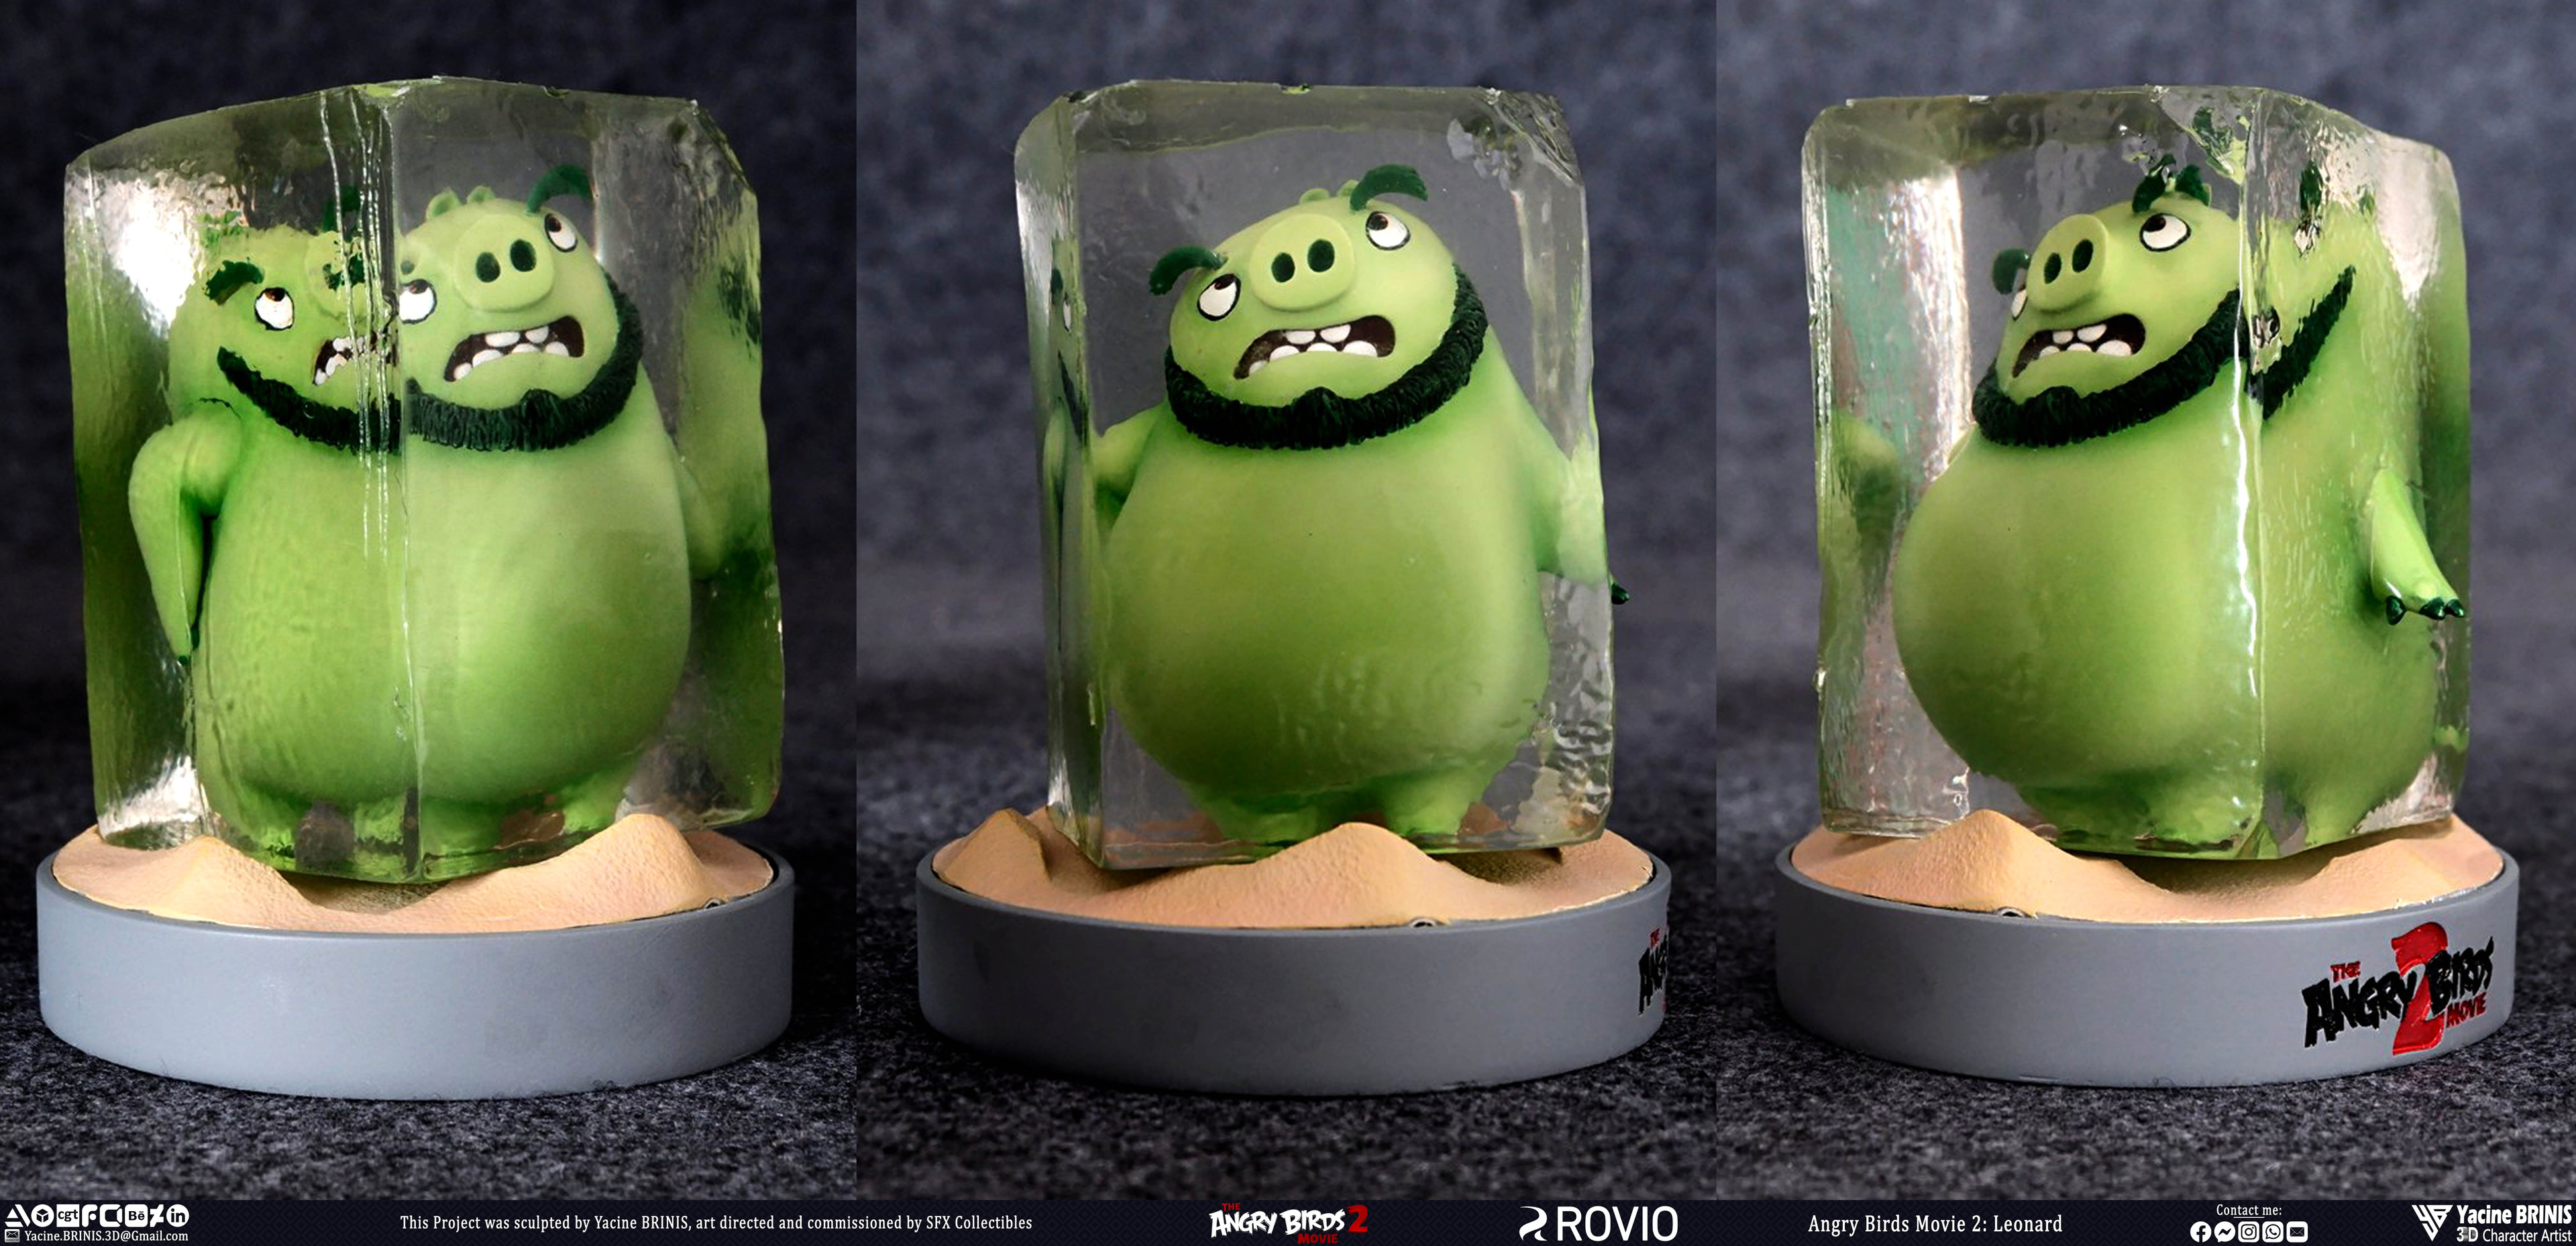 Angry Birds Movie 2 Rovio Entertainment Sculpted by Yacine BRINIS 029 Leonard Printed by SFX Collectibles